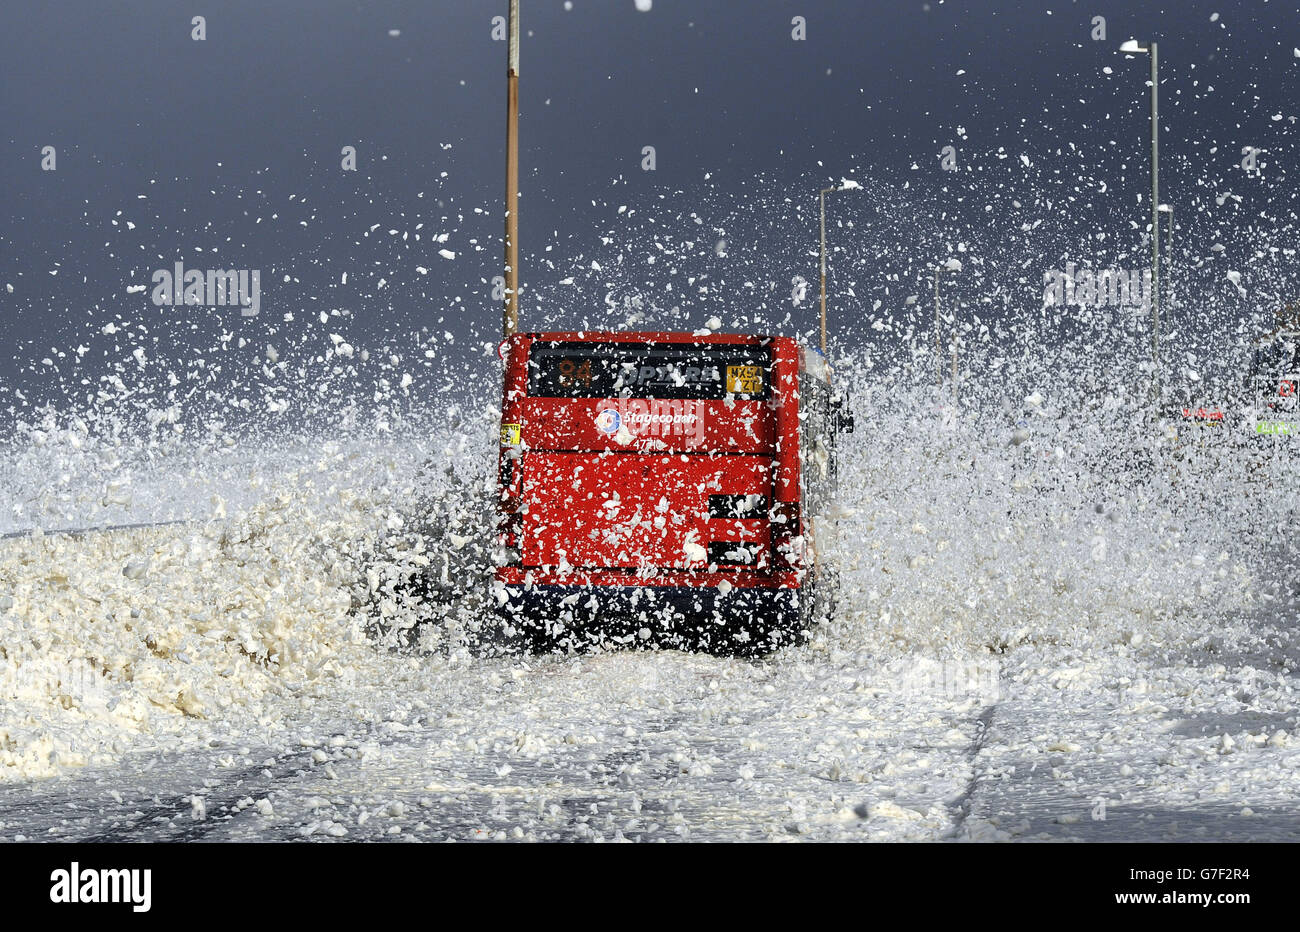 A bus drives through a blizzard of foam as gales and large waves hit the seafront at Cleveleys, near Blackpool, as the remnants of Hurricane Gonzalo blew into Britain, causing rush-hour travel misery for road, rail and air travellers. Stock Photo